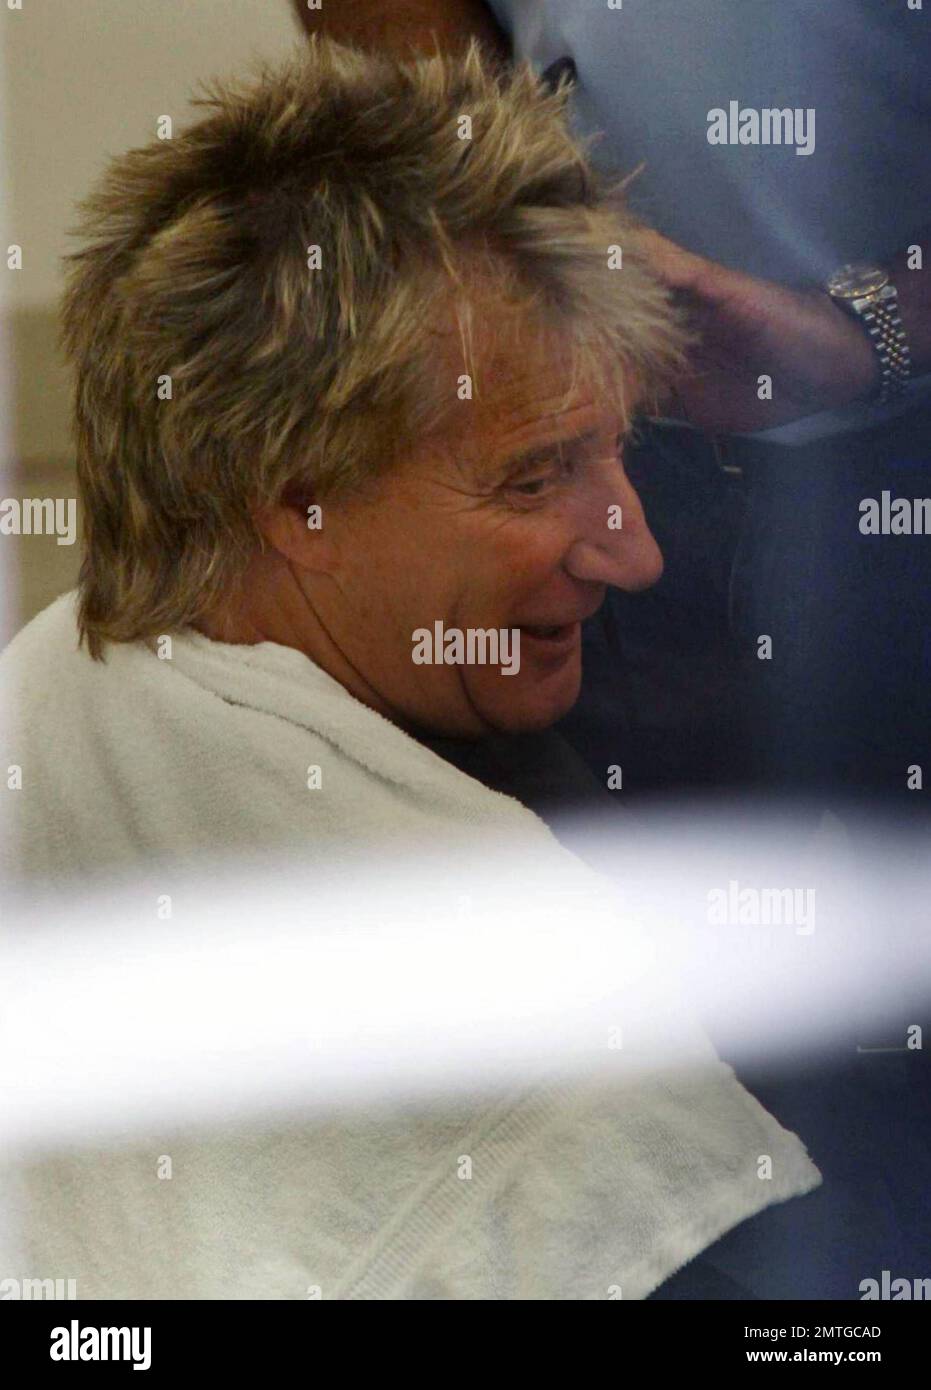 EXCLUSIVE!! Legendary pop rock singer Rod Stewart stops by at world  renowned hair stylist Daniel Galvin's salon to get his hair cut. Stewart,  who is set to become the father of his